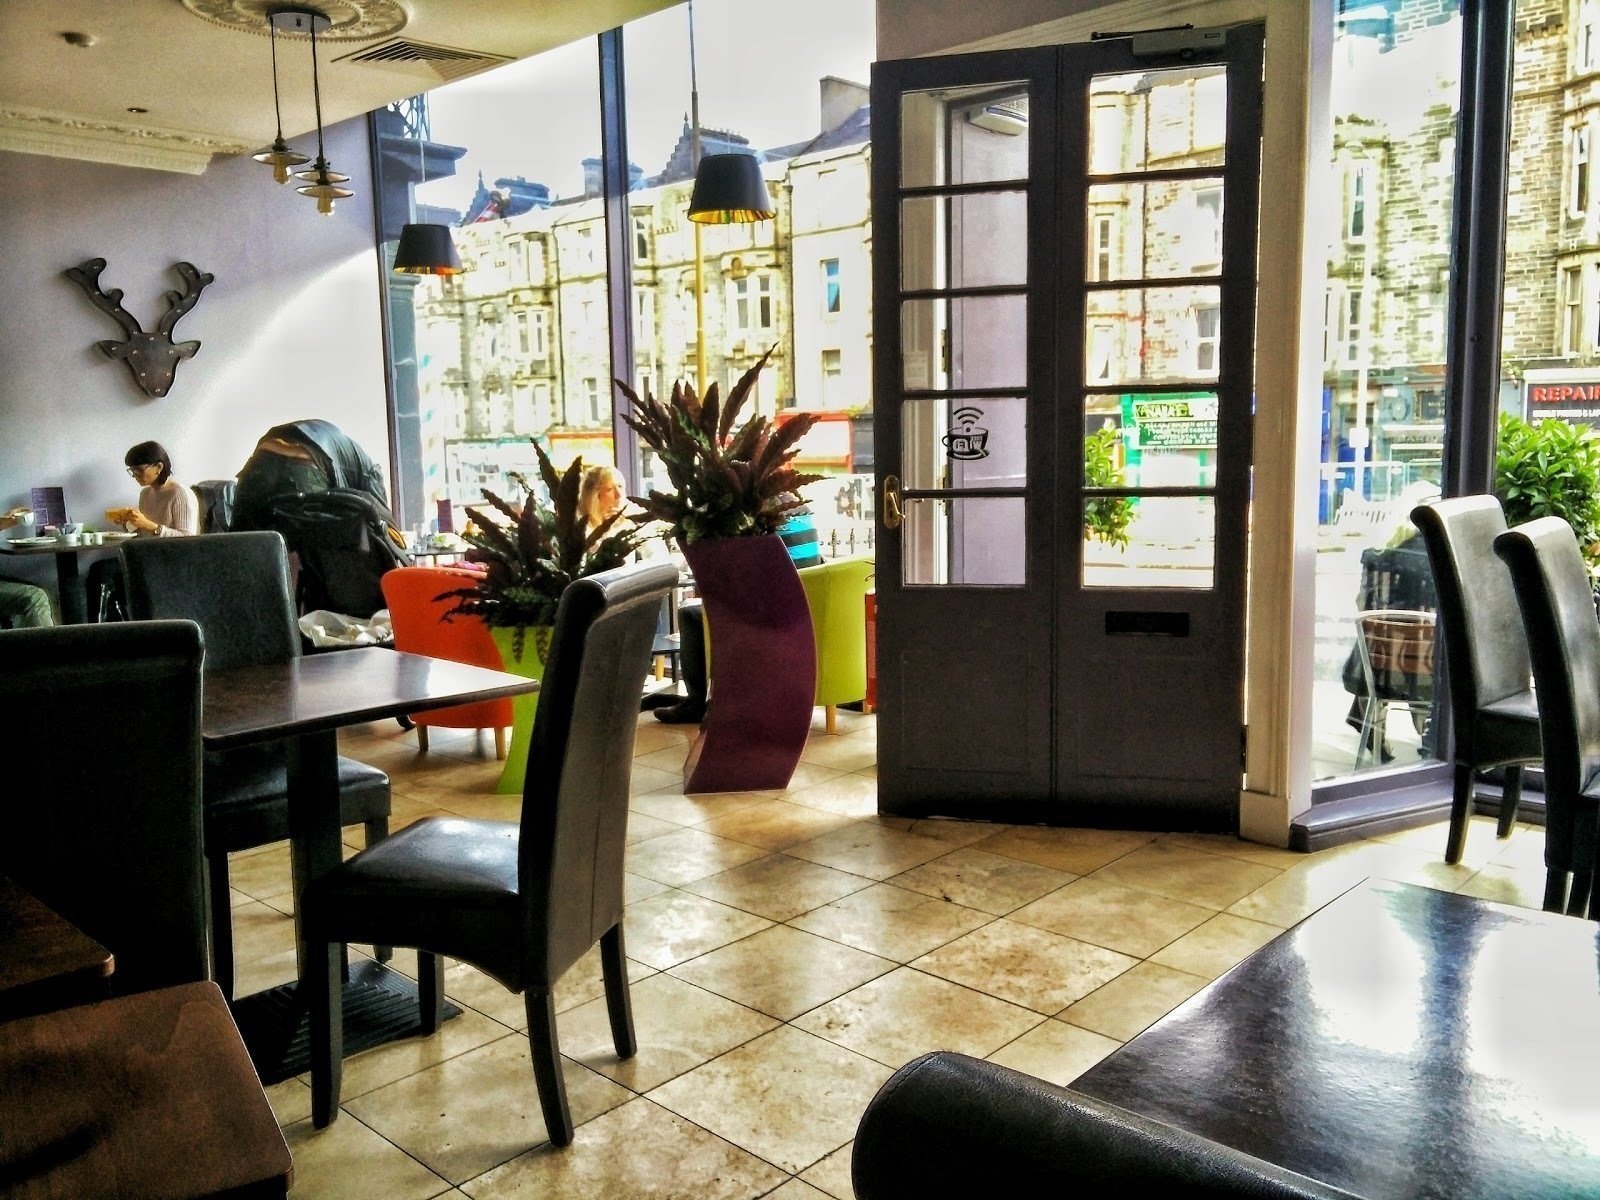 <span class="translation_missing" title="translation missing: en.meta.location_title, location_name: Owl&amp;Deer Coffee House and Bistro, city: Edinburgh">Location Title</span>